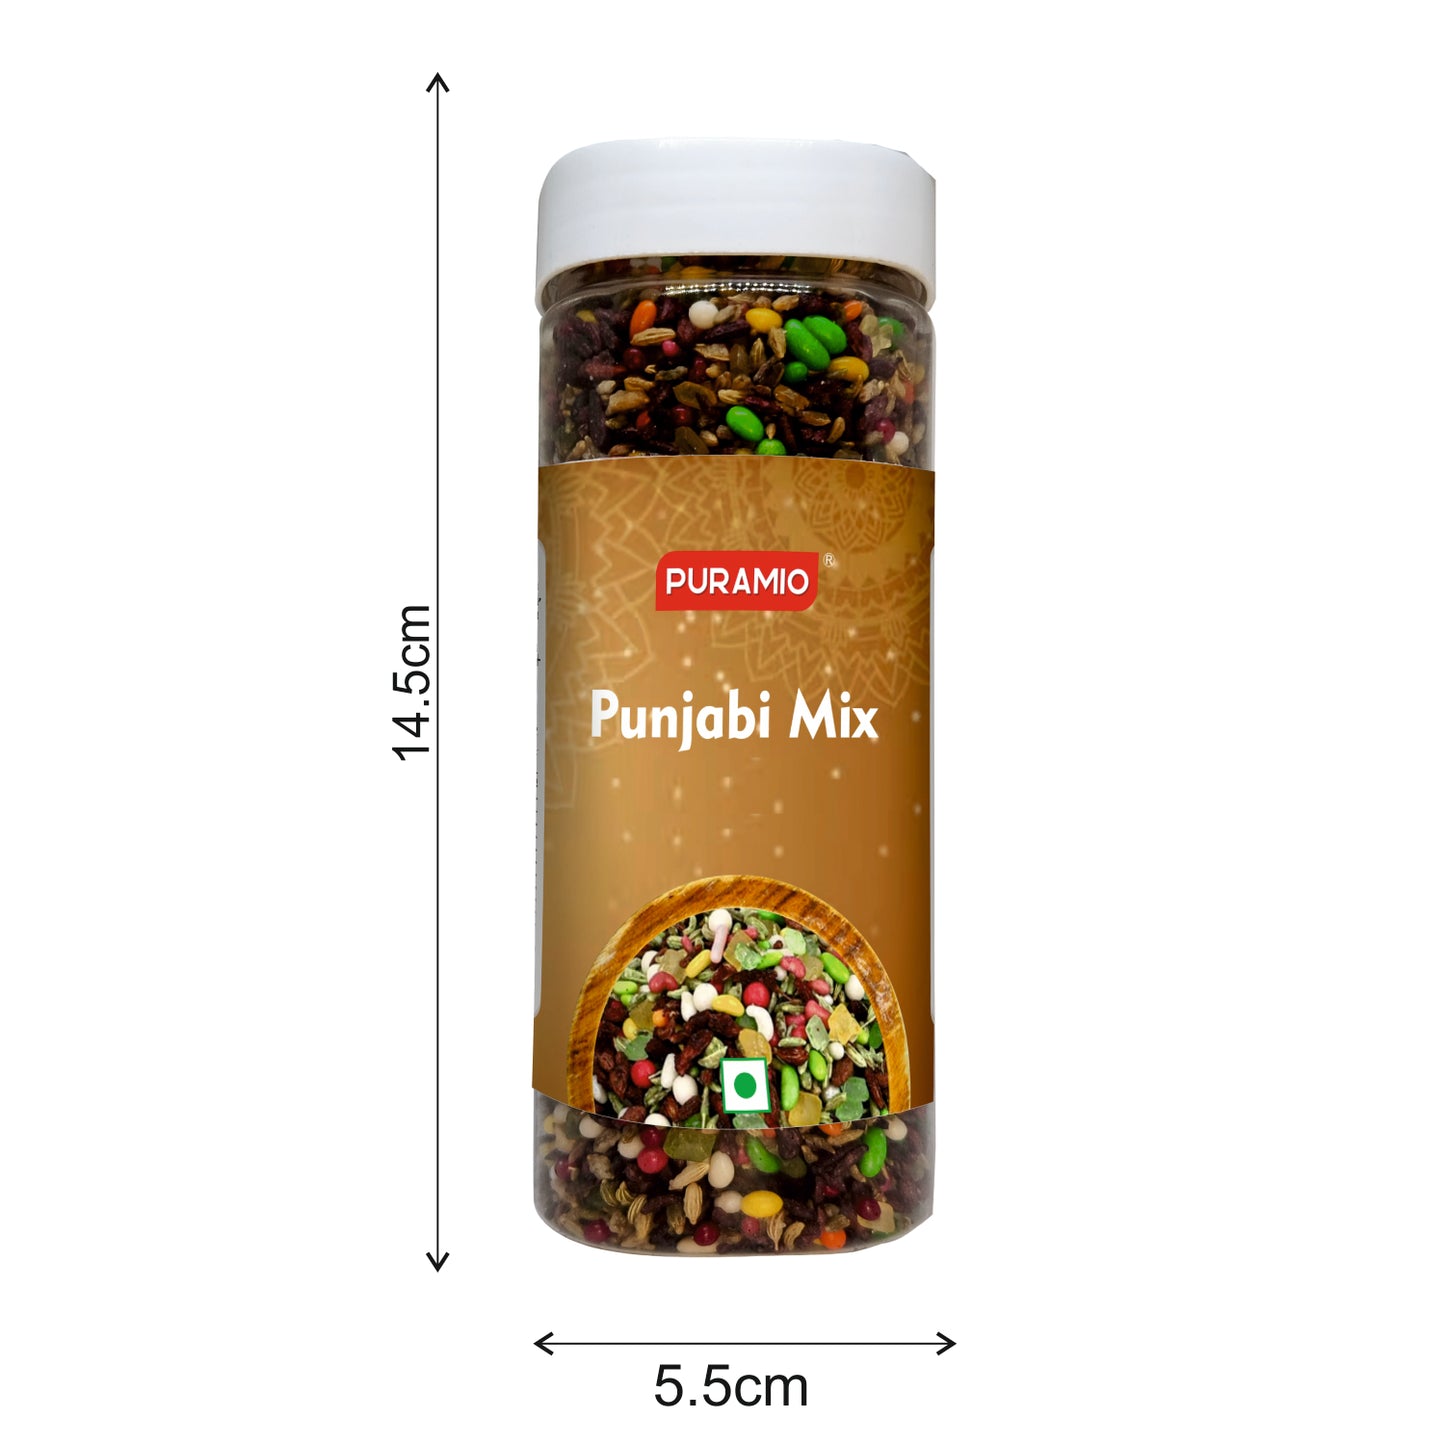 Puramio Punjabi Mix | Pure and Premium Mukhwas Mouth Freshener | Thandai Mint Saunf | Good for Bad Breath, Good for Digestion, After Meal and Drink, 220g